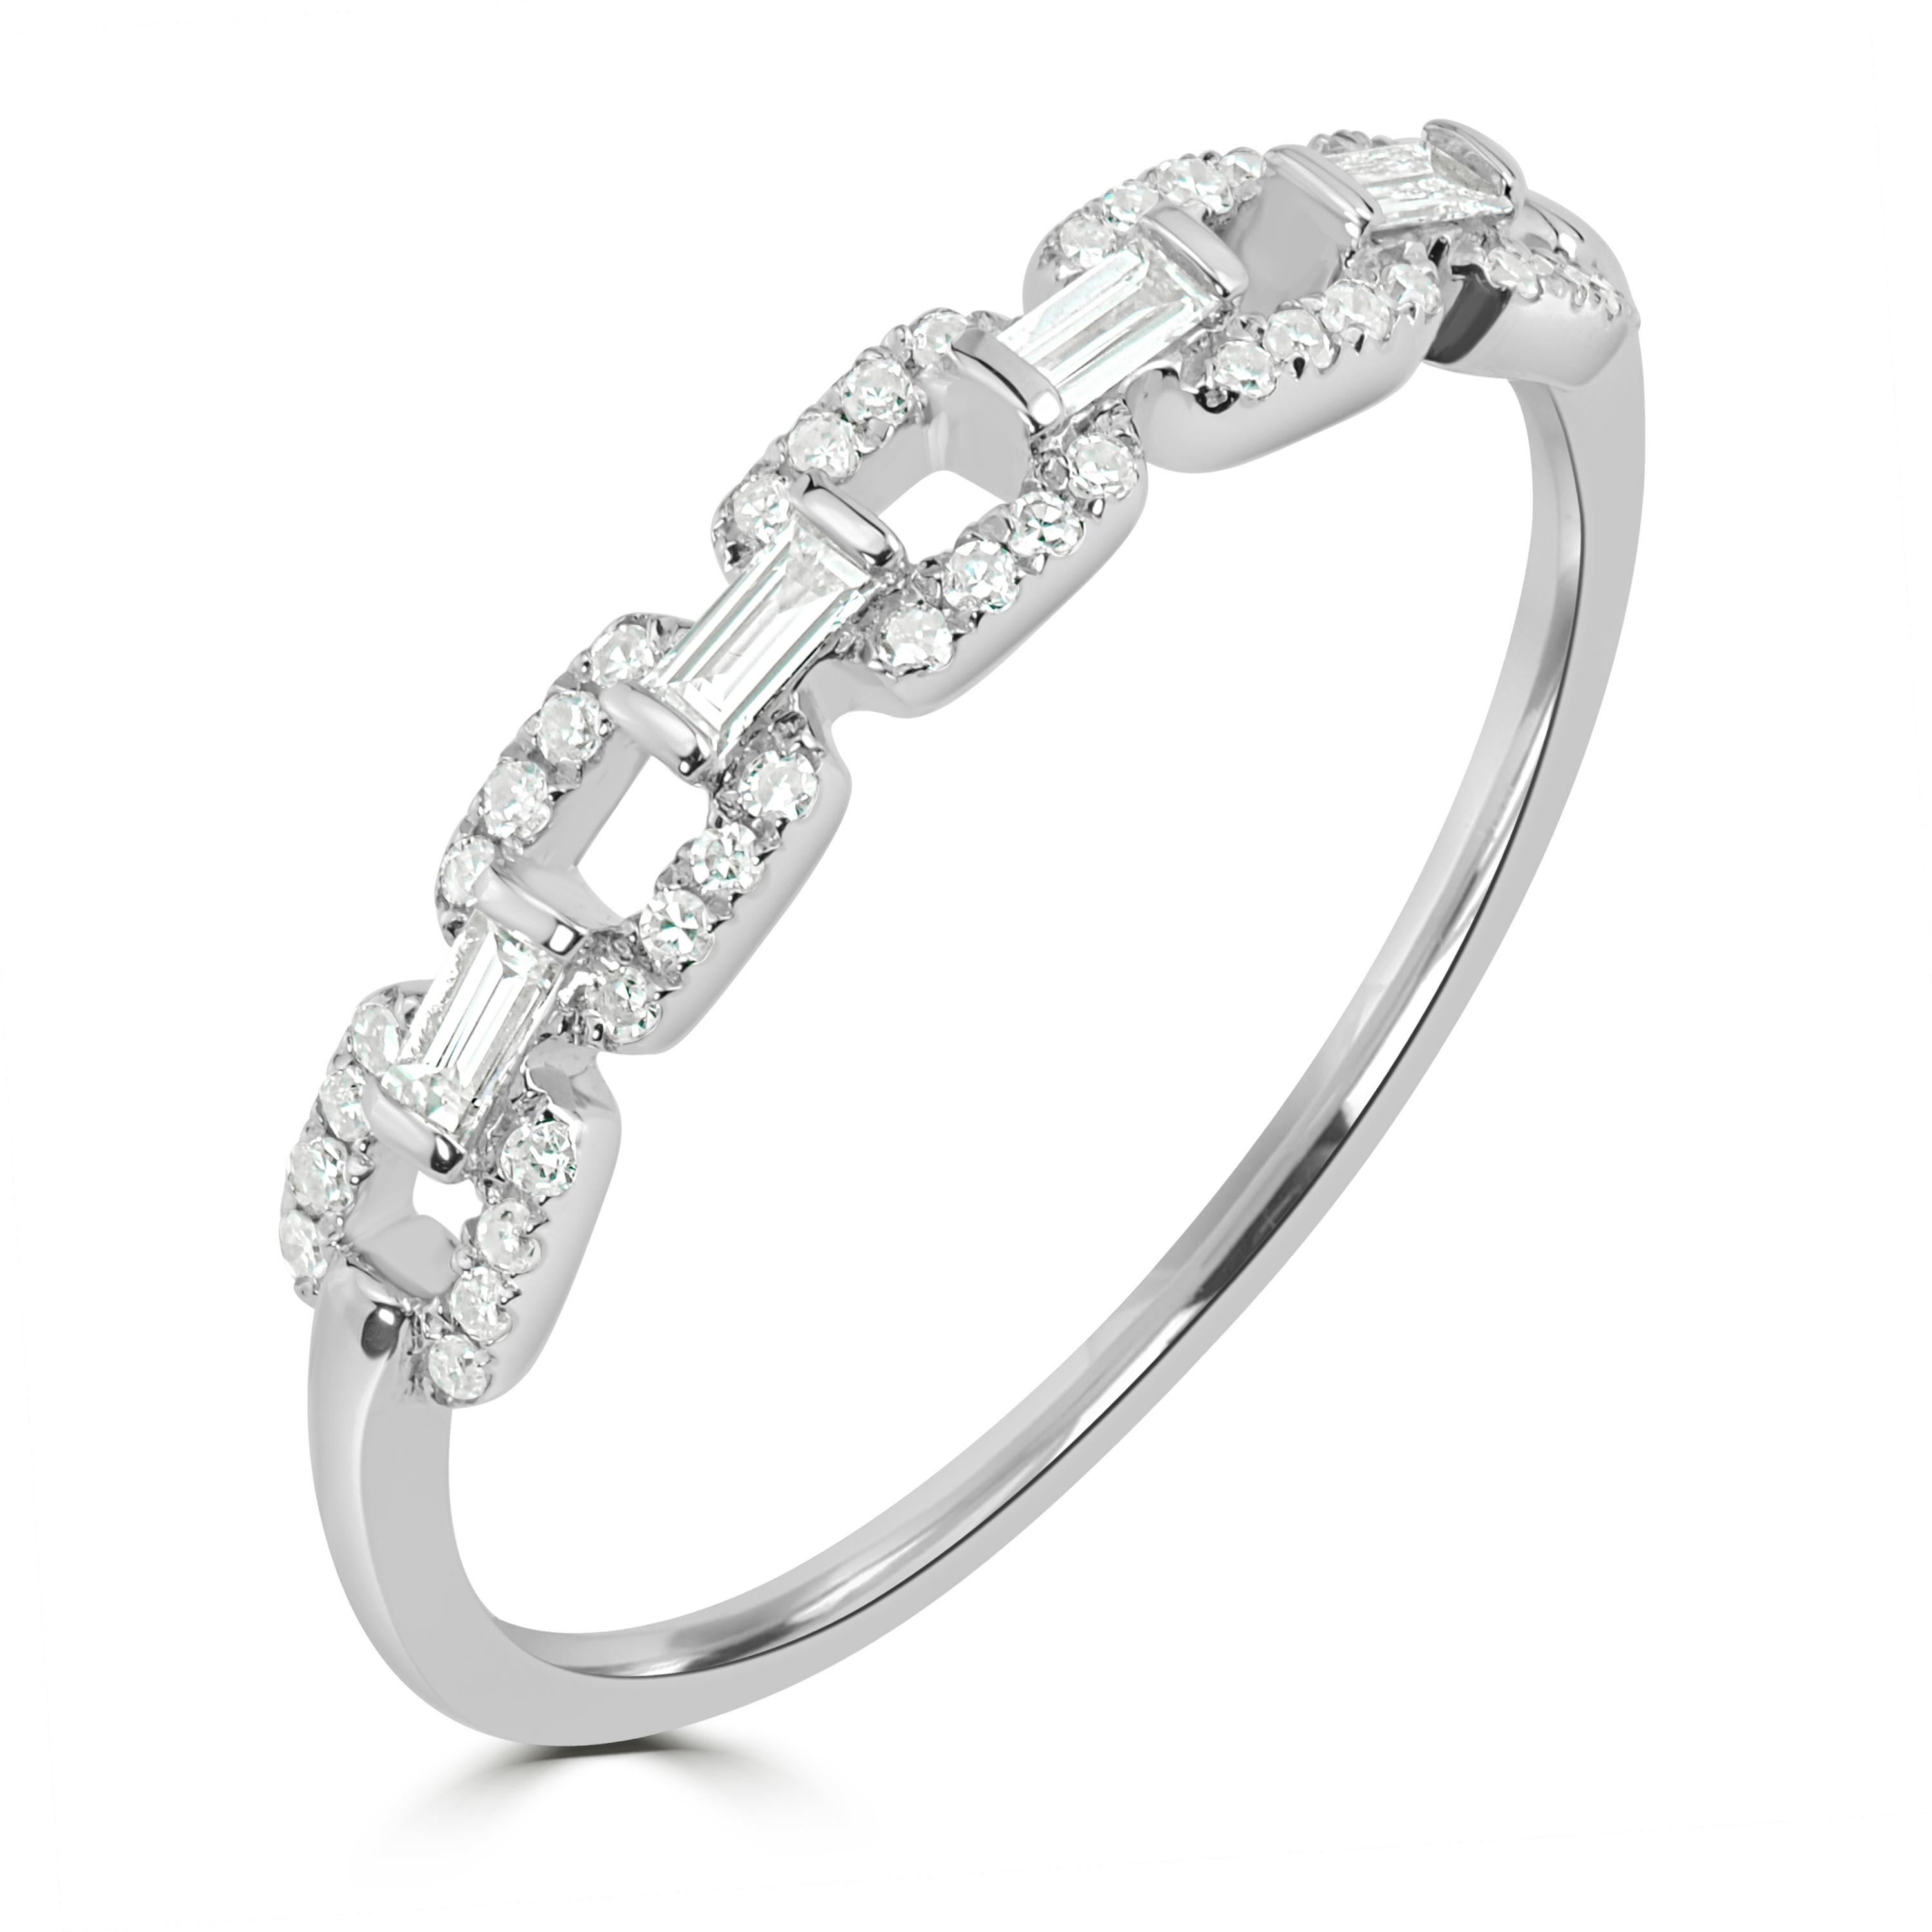 This Luxle Diamond Ring is a cocktail of 40 Round Single-Cut and 4 Baguette Full-Cut White Diamonds in micro pave and bar settings, respectively. The total weight of the diamonds is 0.23 cwt in this pave diamond jewelry that is the ideal Mother’s